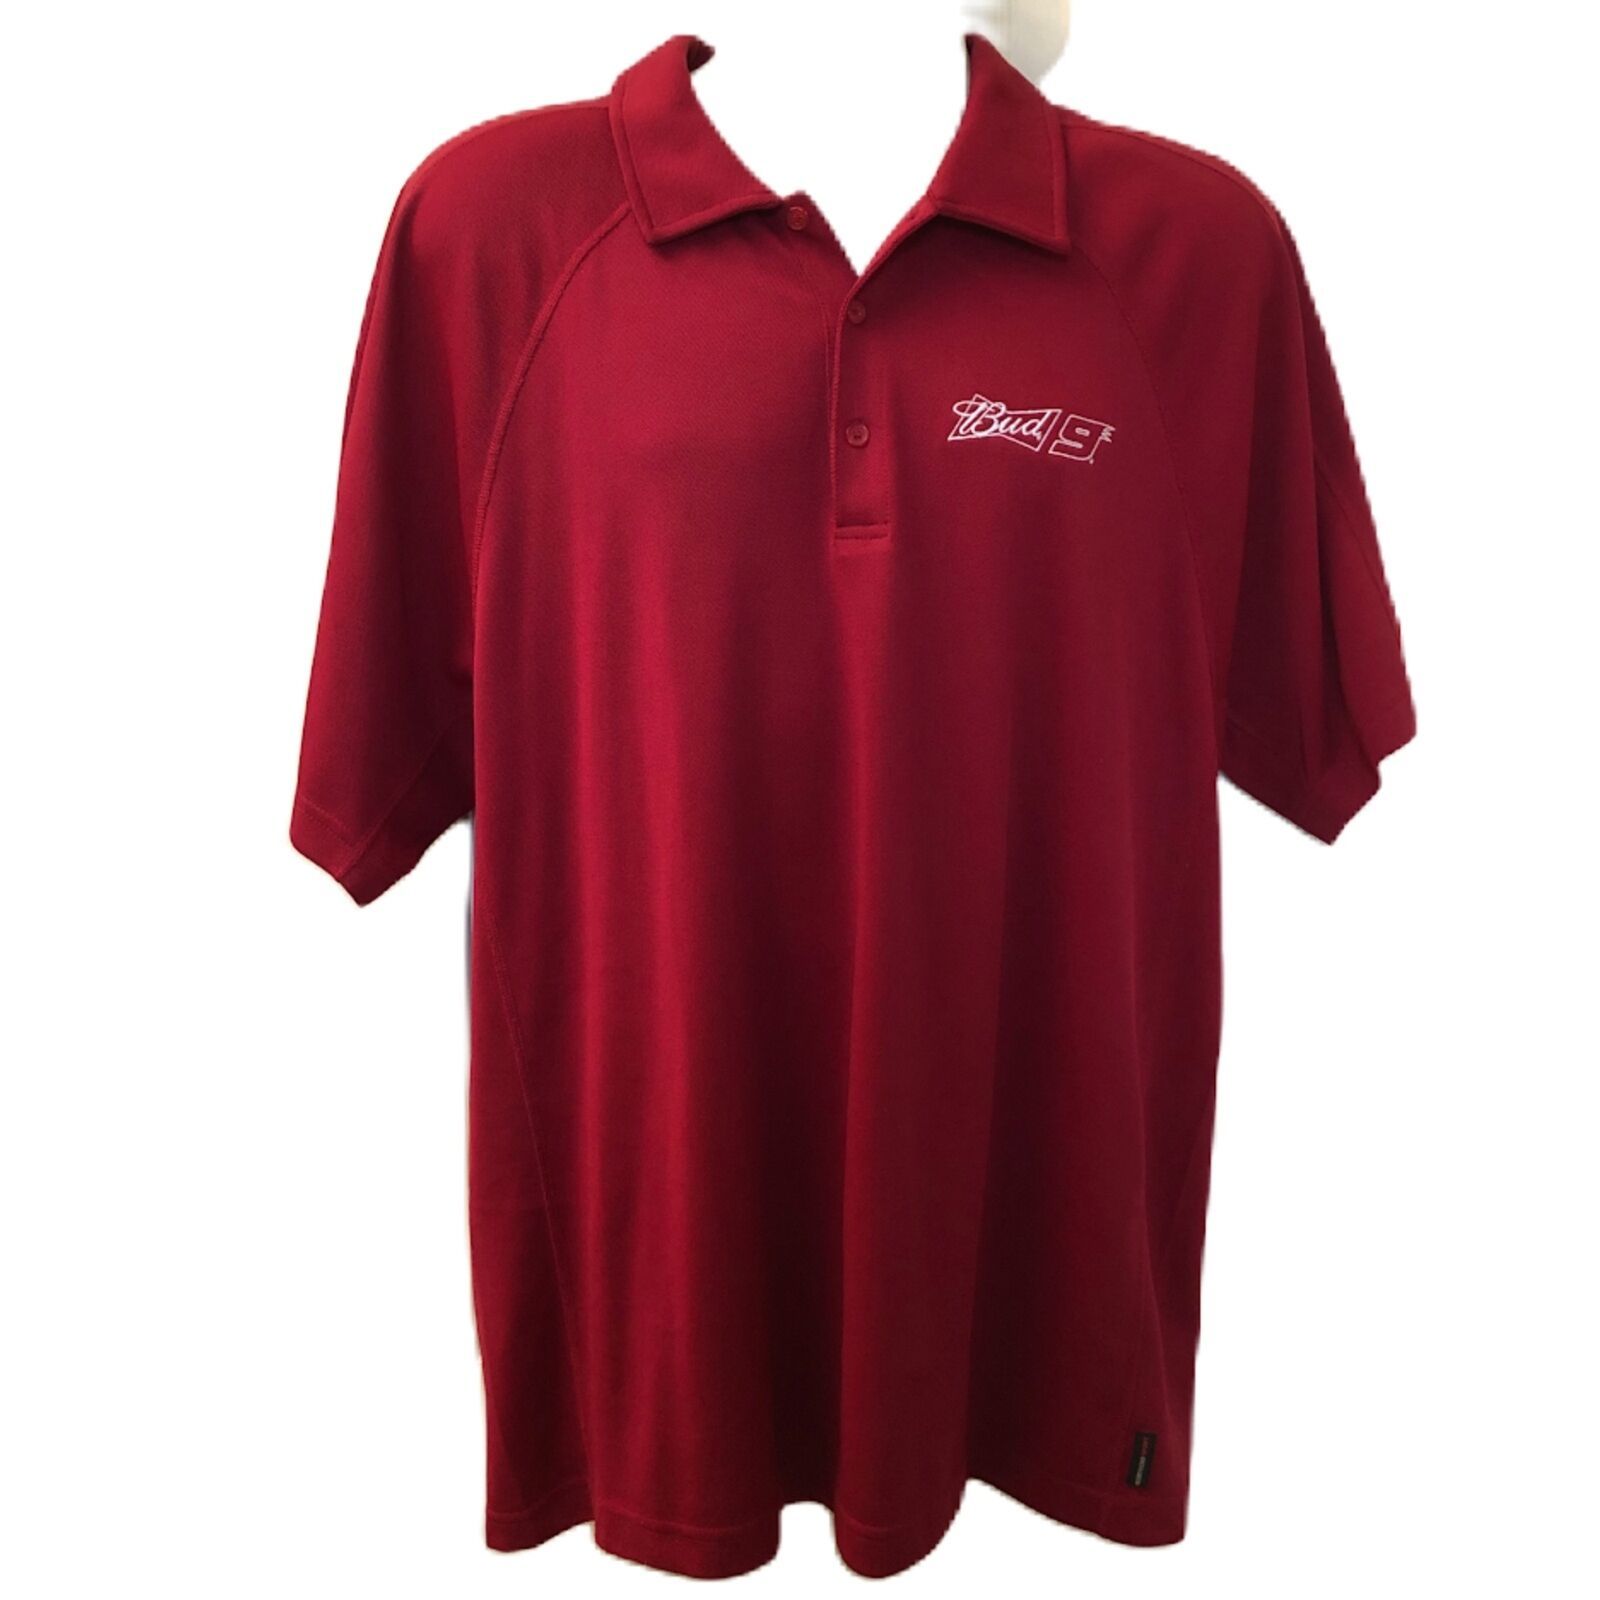 Primary image for Vintage Budweiser Bud No 9 NASCAR Motorsports Men's Red Polo Shirt Size XL